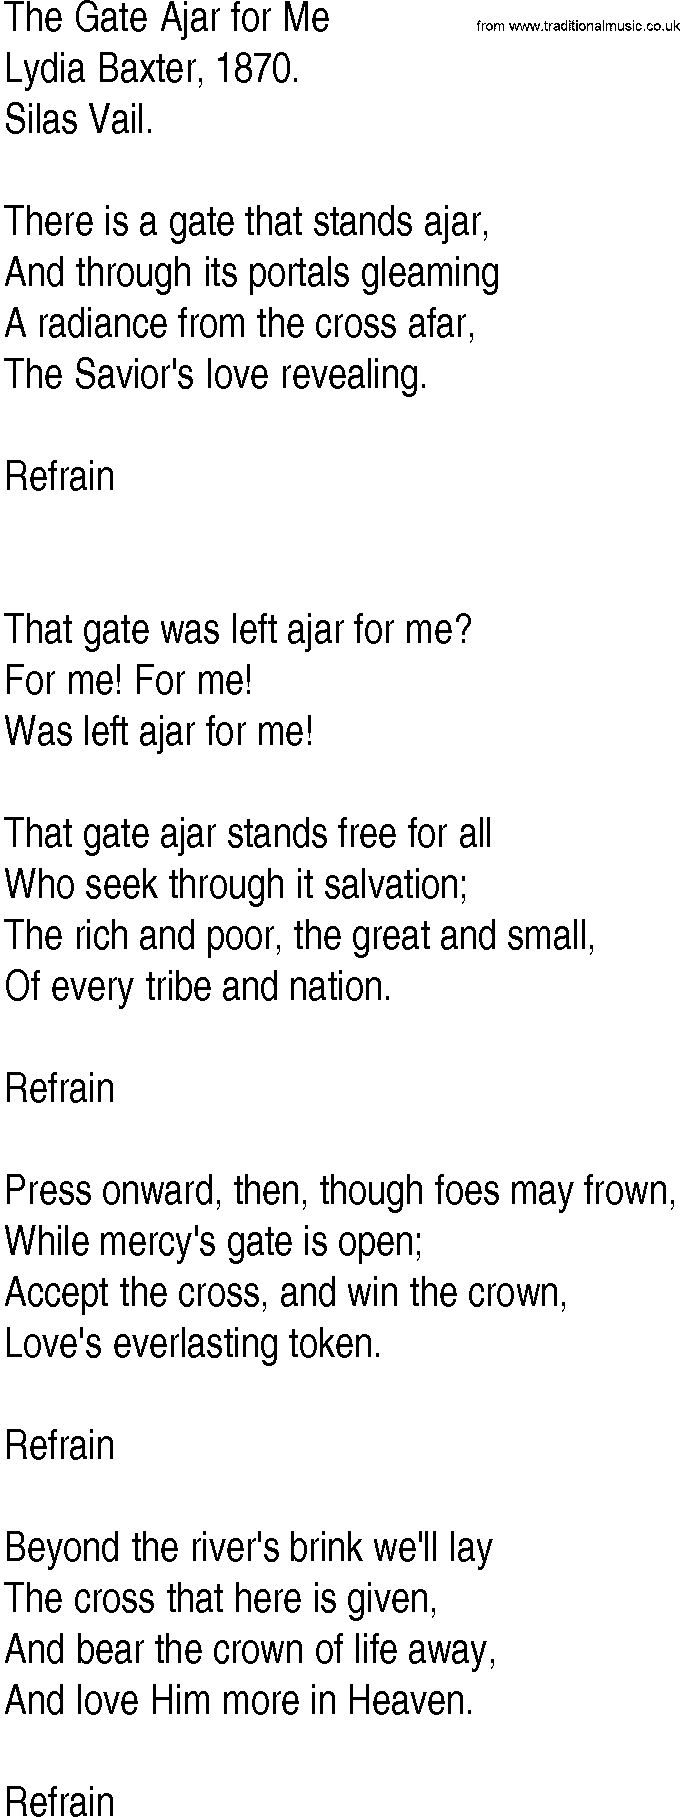 Hymn and Gospel Song: The Gate Ajar for Me by Lydia Baxter lyrics